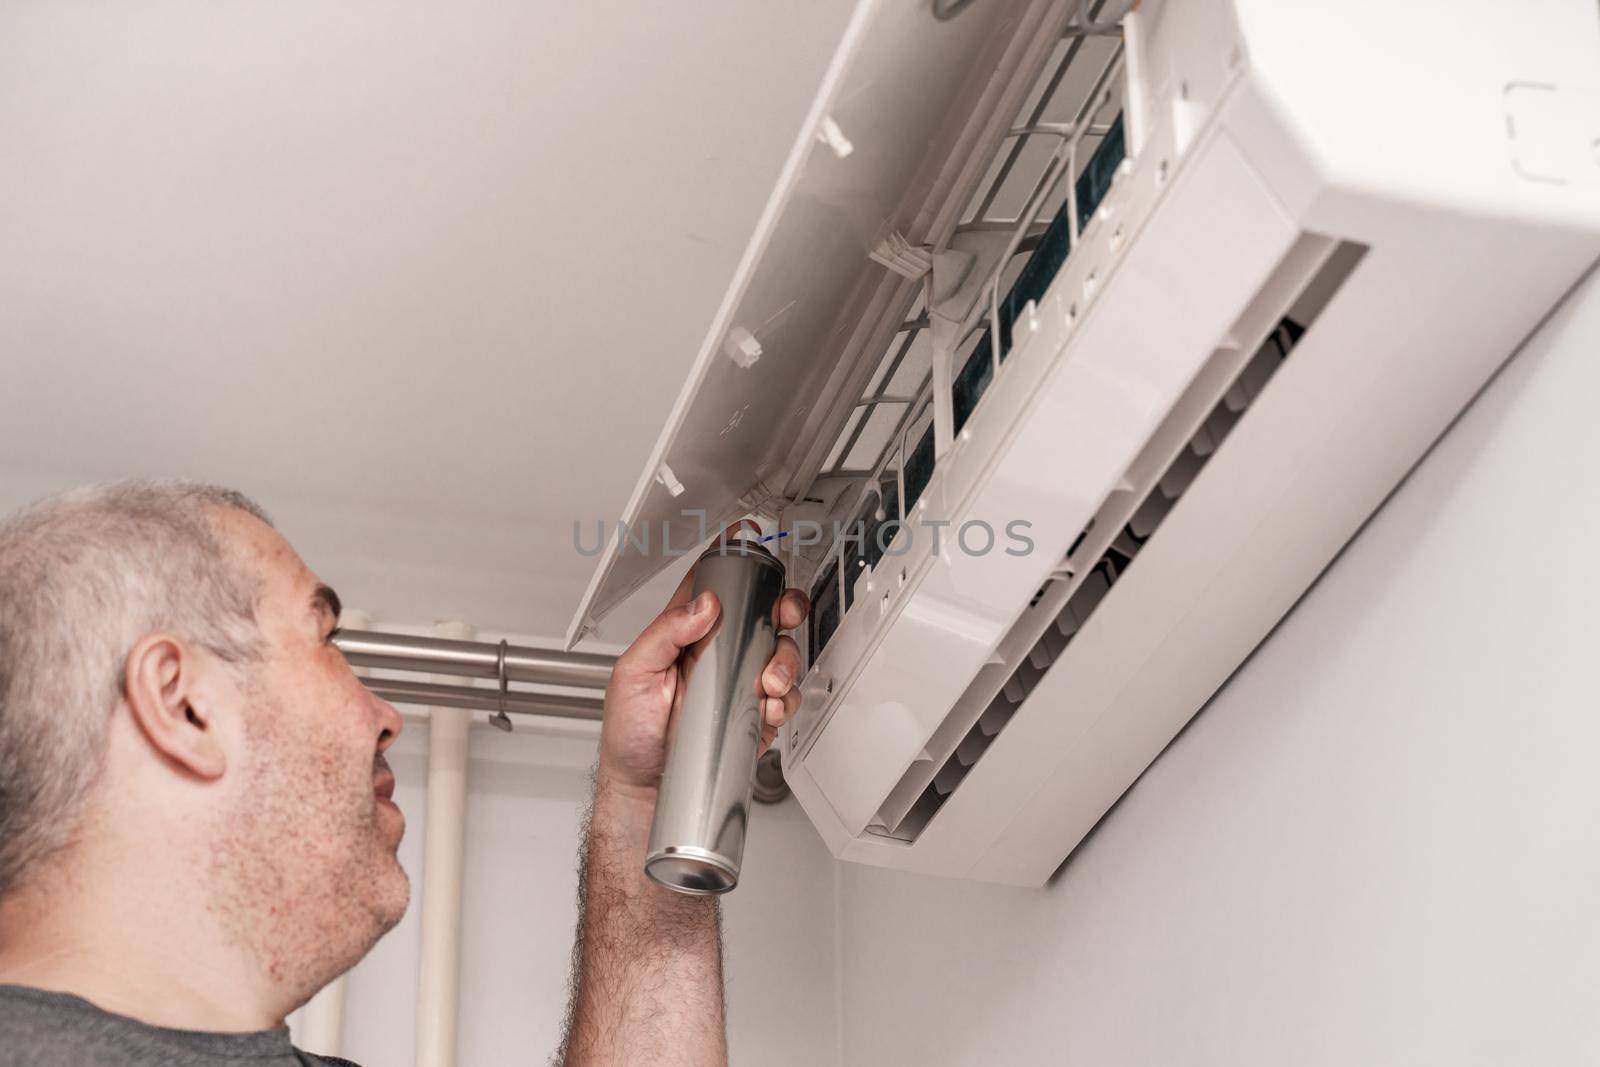 man cleaning home air conditioner with antibacterial spray by Lena_Ogurtsova